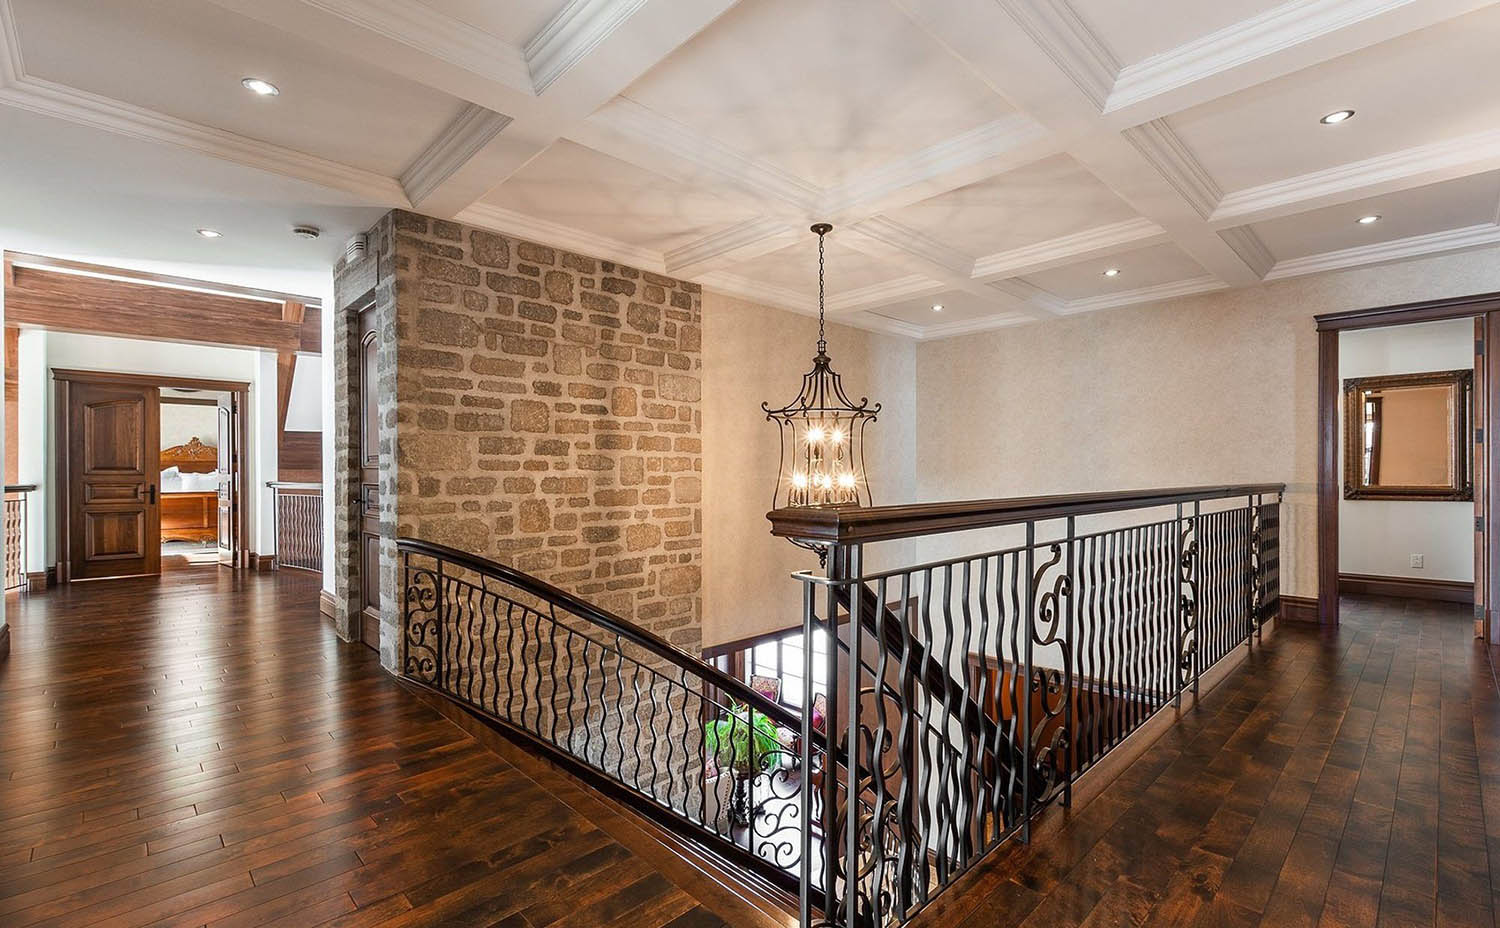 Second floor all white coffered ceiling over the main staircase and hallway with chandelier.